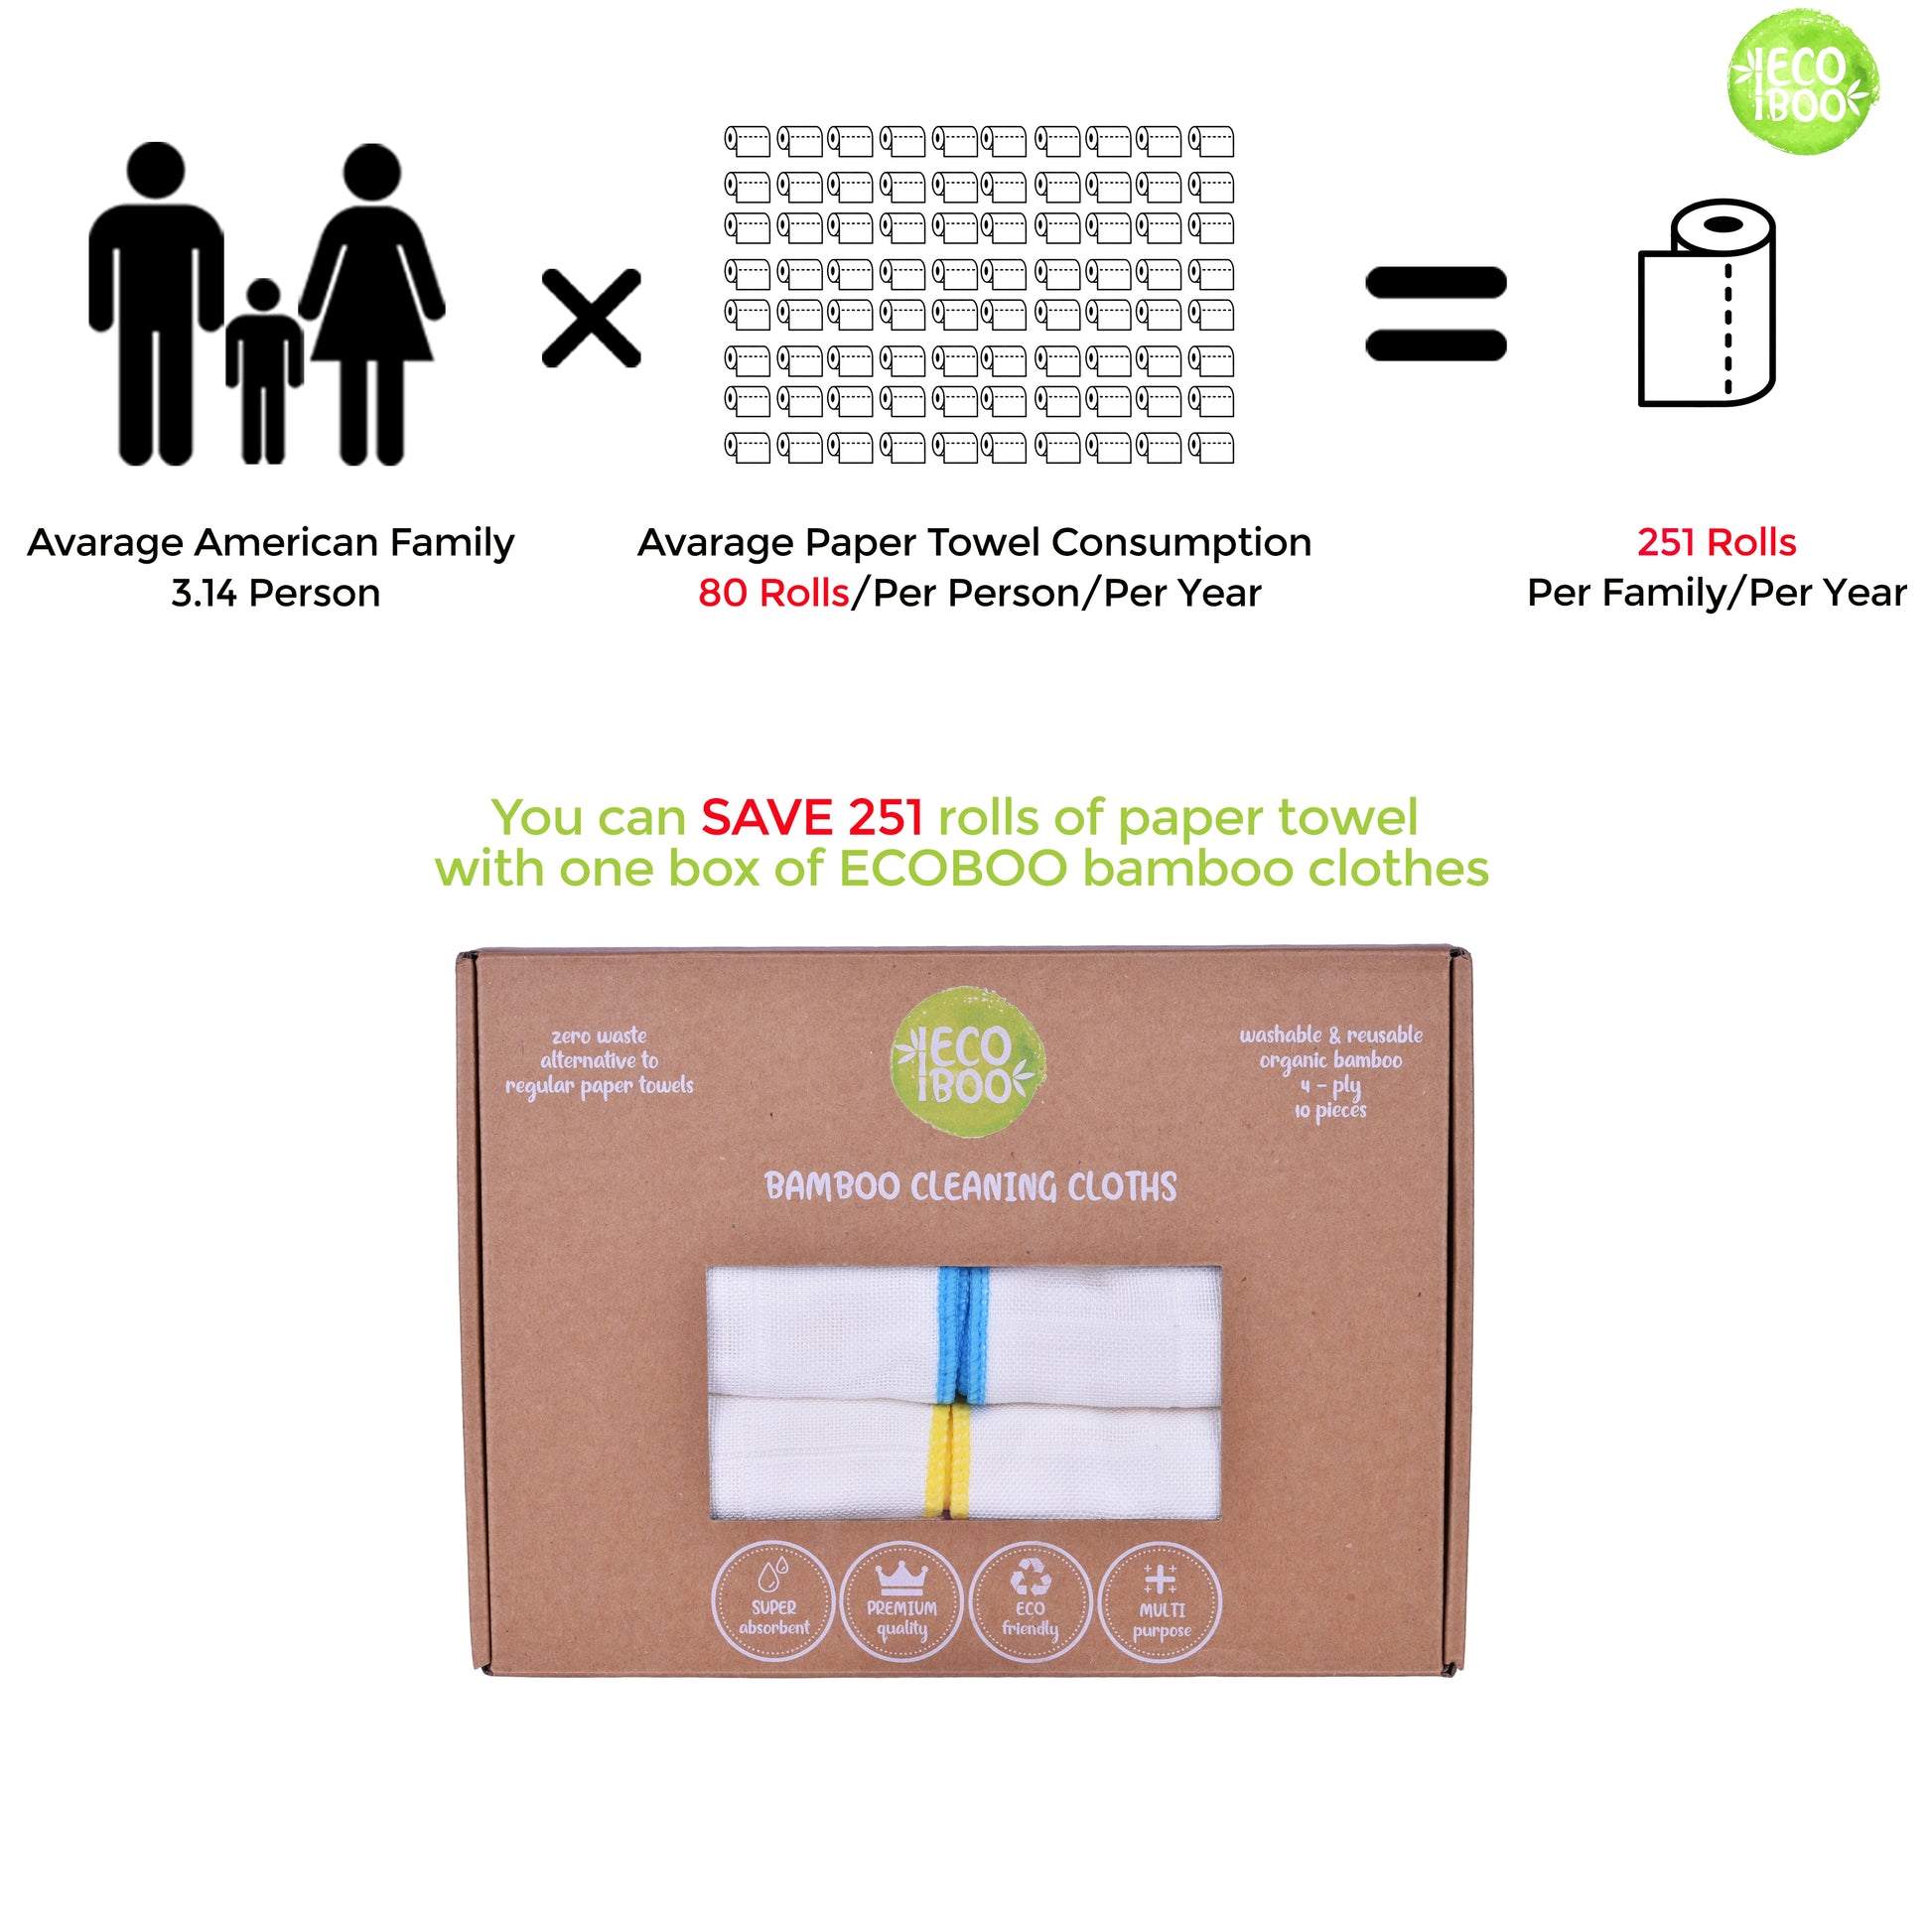 Save 251 rolls of paper towel with reusable bamboo cloths